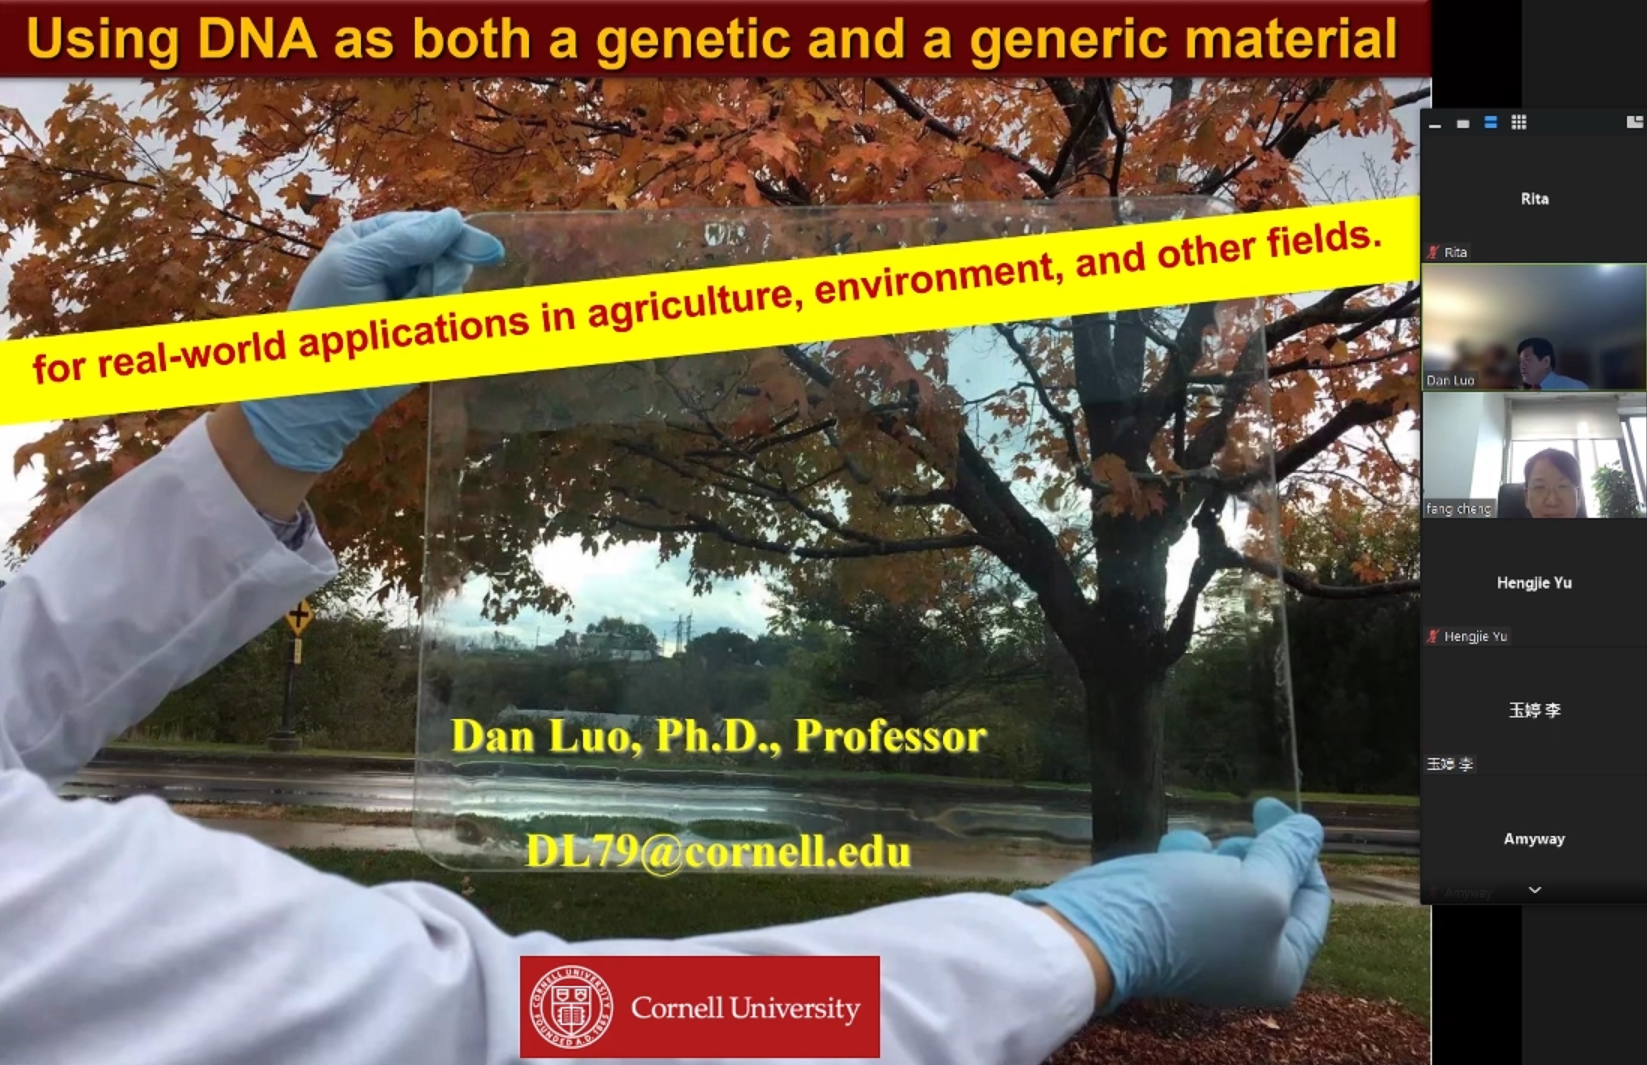 Dr. Dan Luo Gave the Report Named “Using DNA as Both a Genetic and a Generic Material” Online